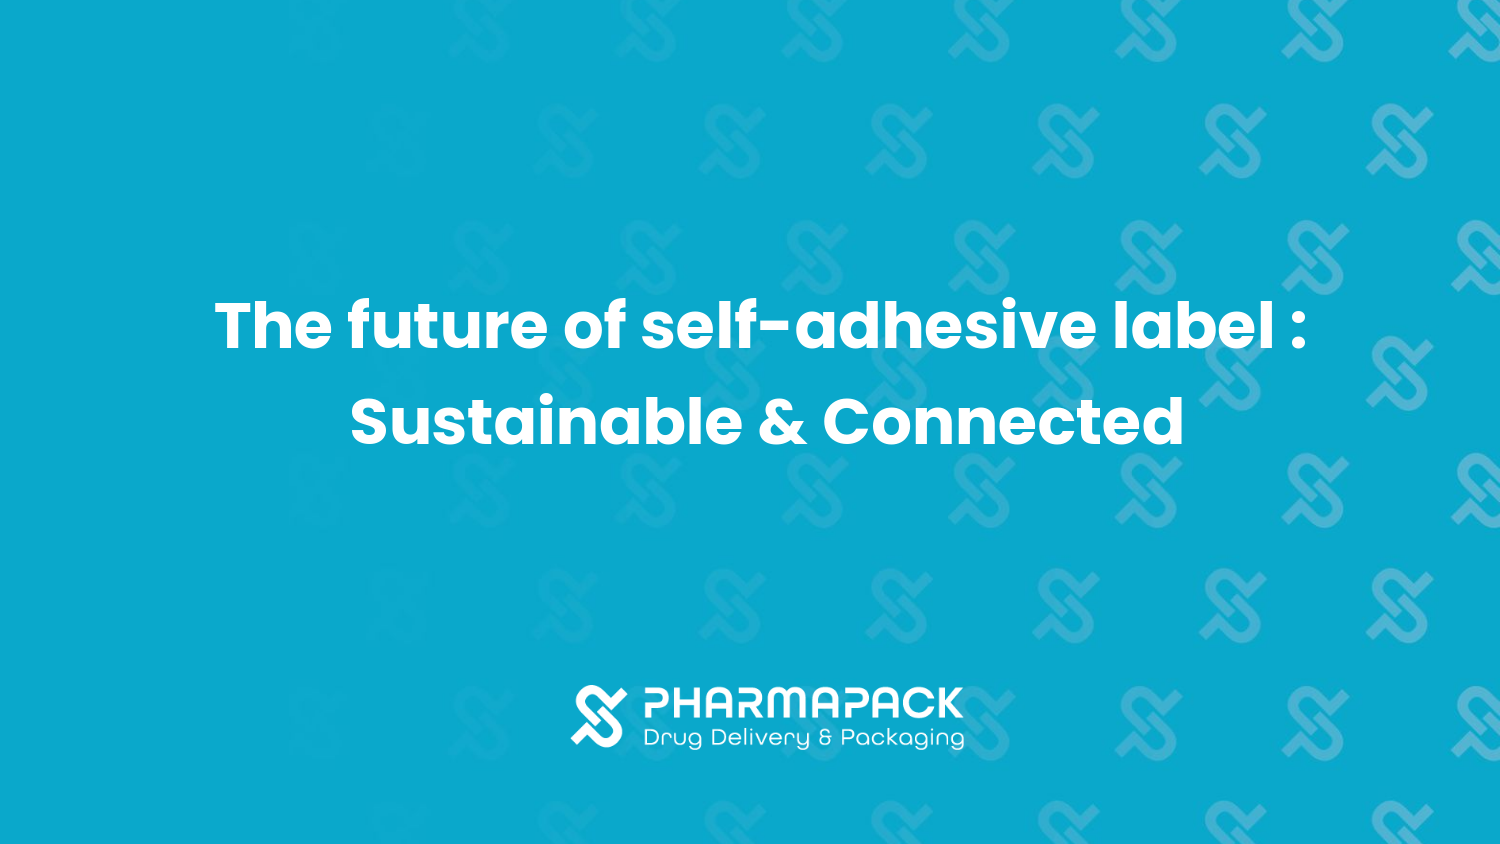 The Future of Self-adhesive Label : Sustainable & Connected